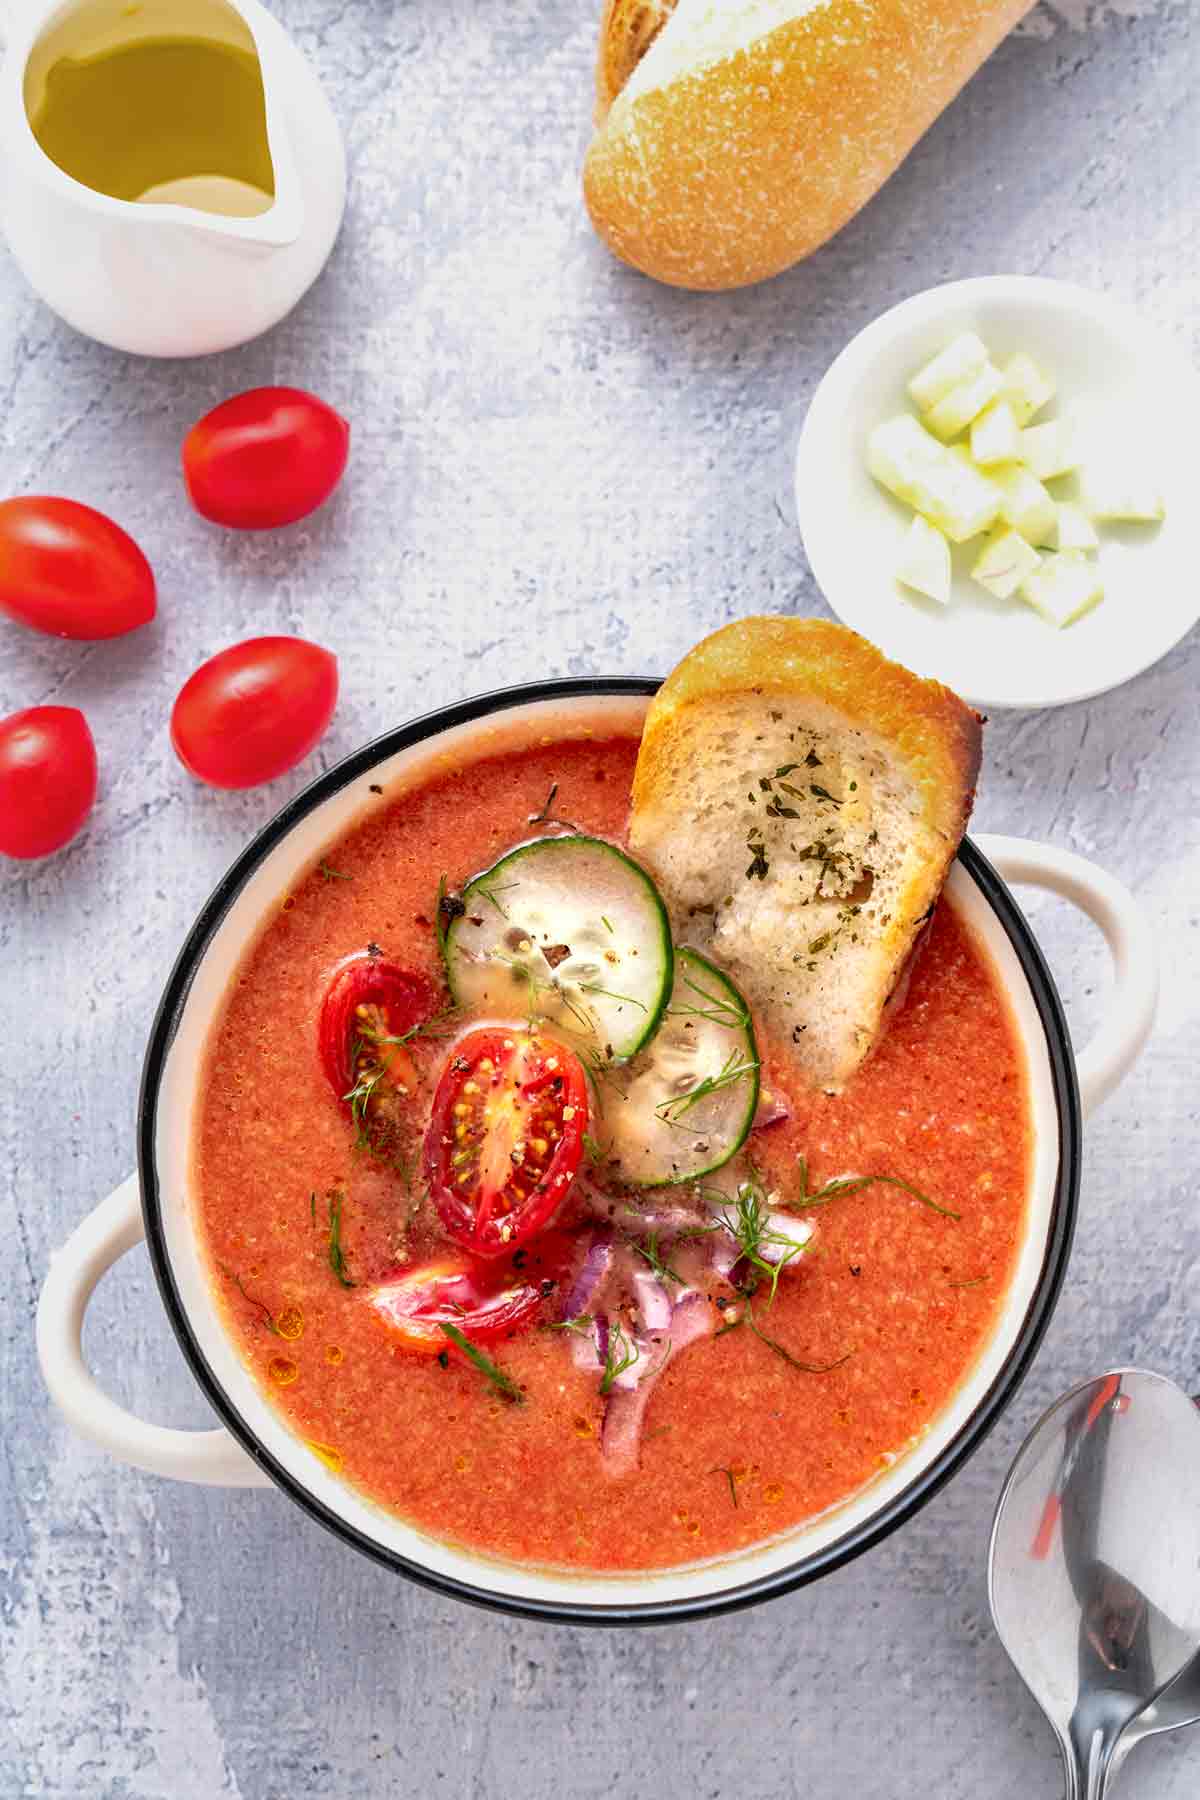 Cold Cucumber and Tomato Gazpacho Soup